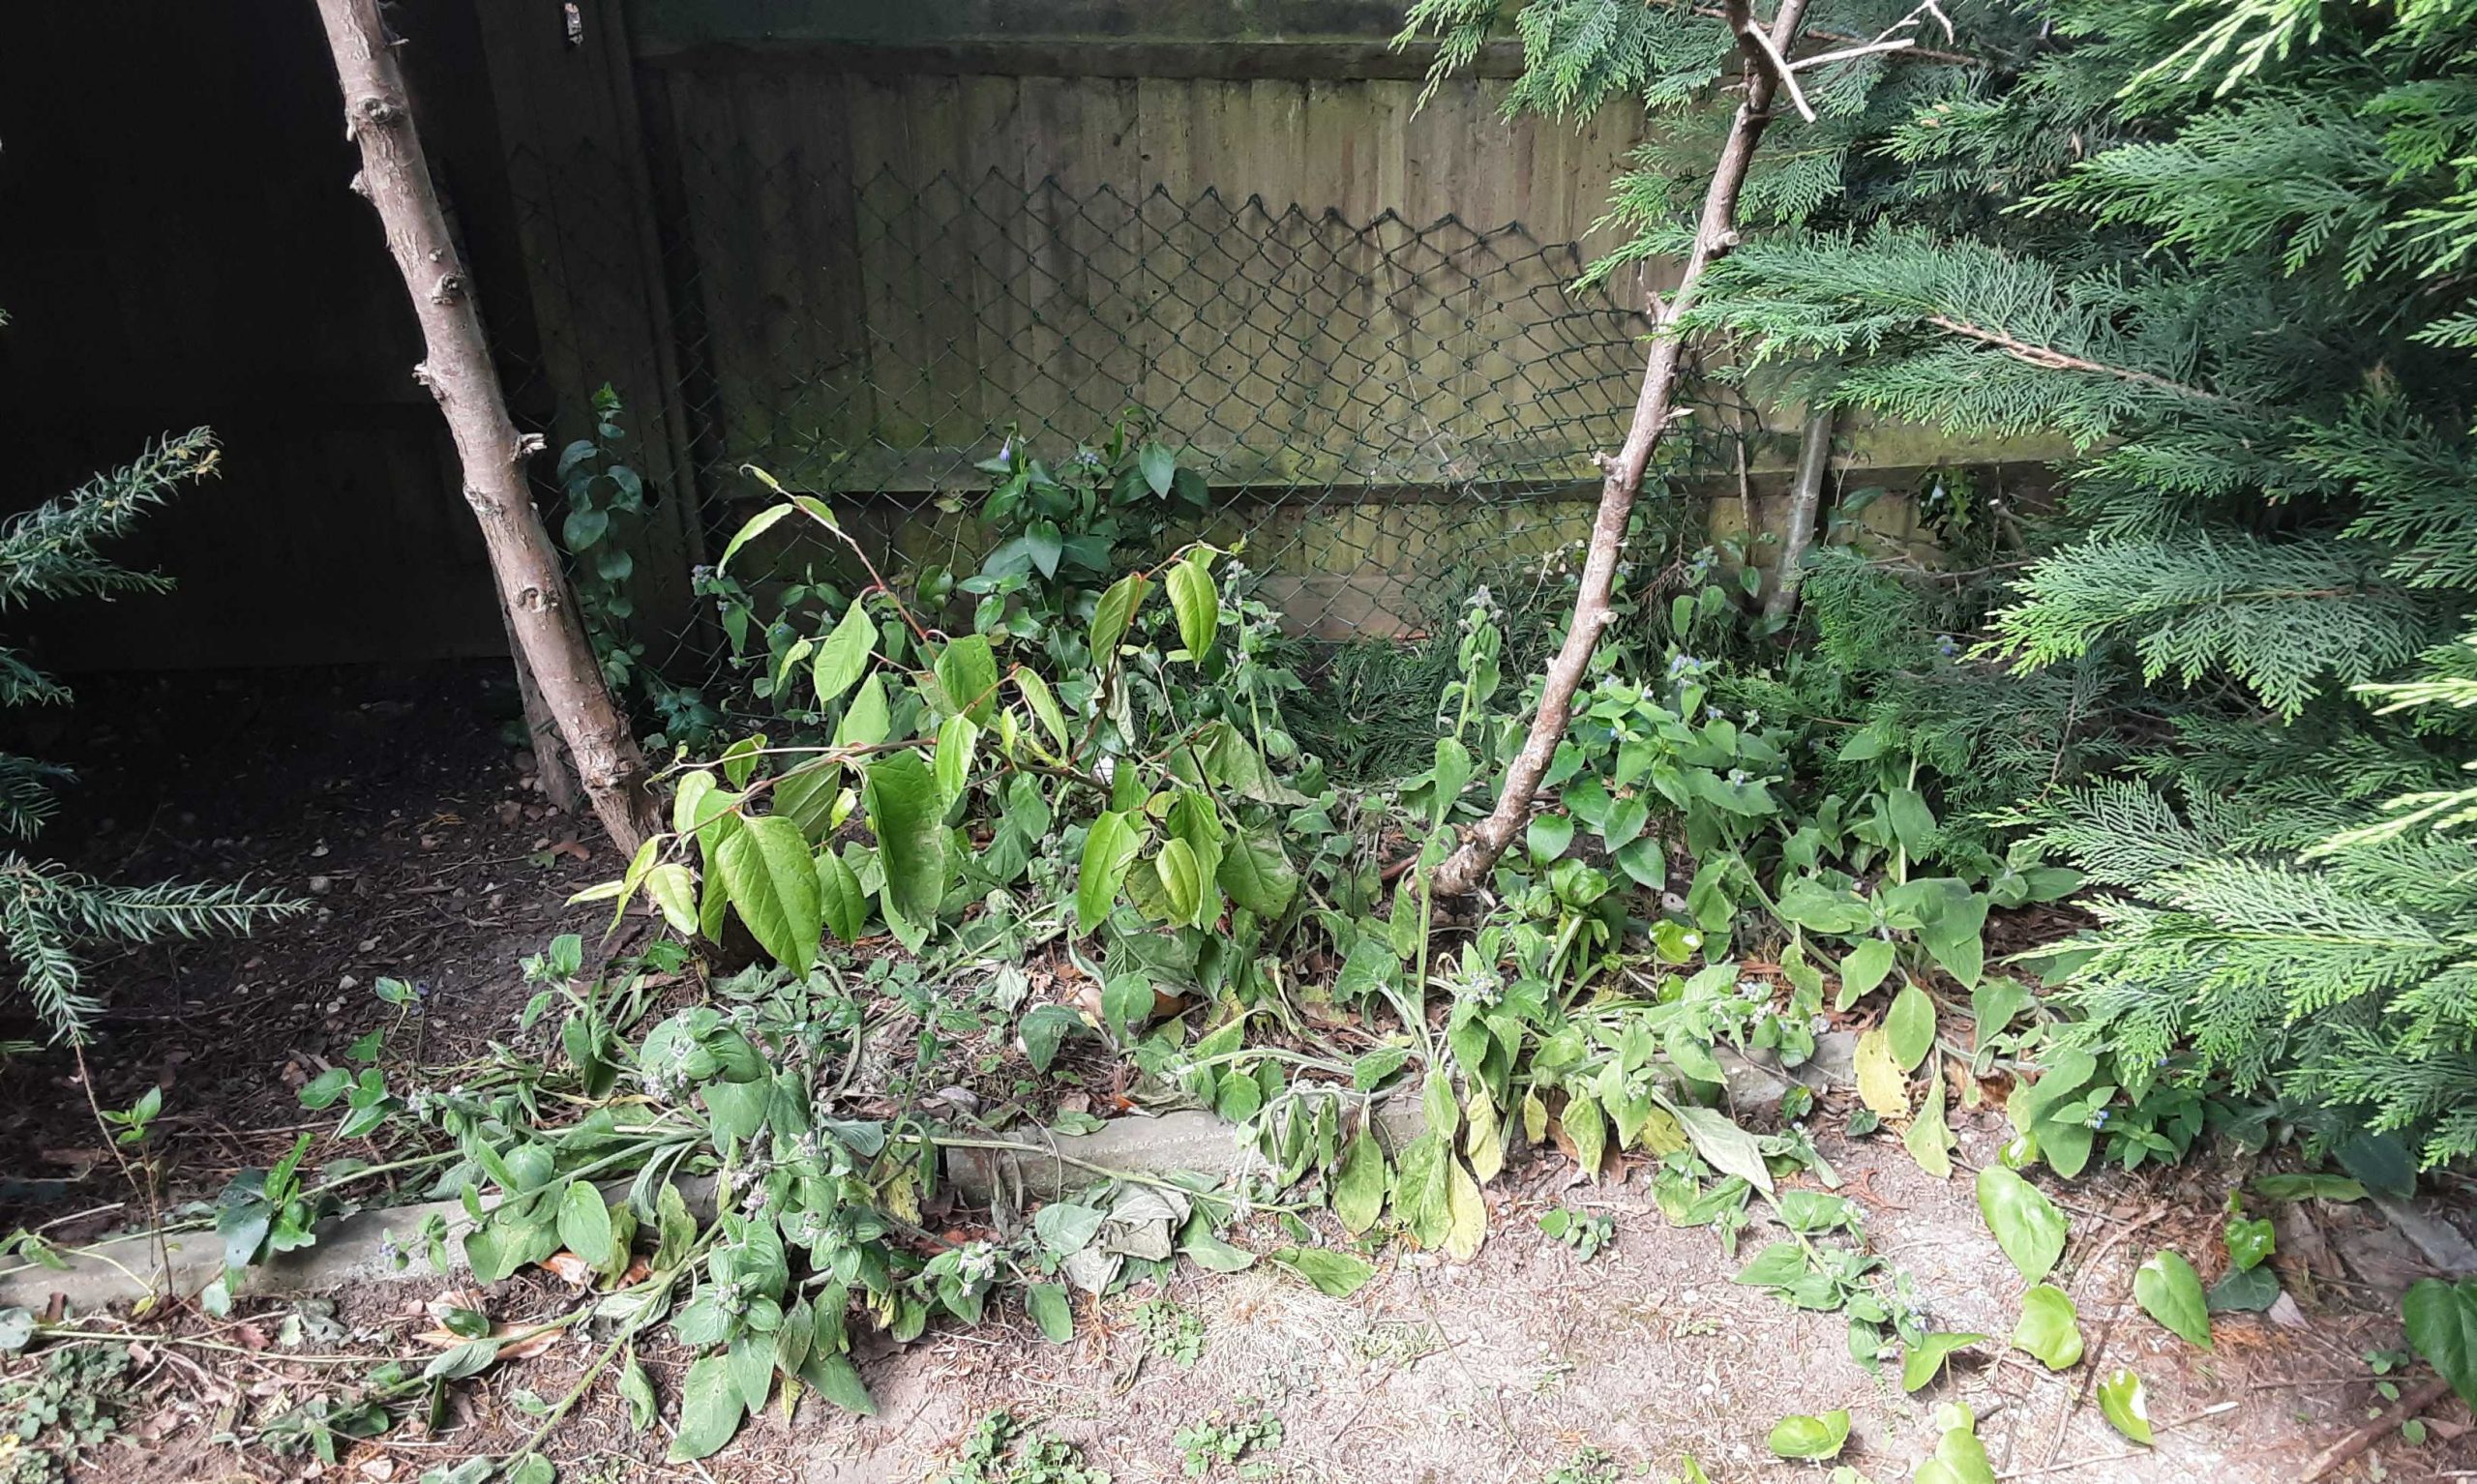 Excavation removes knotweed from homeowners property